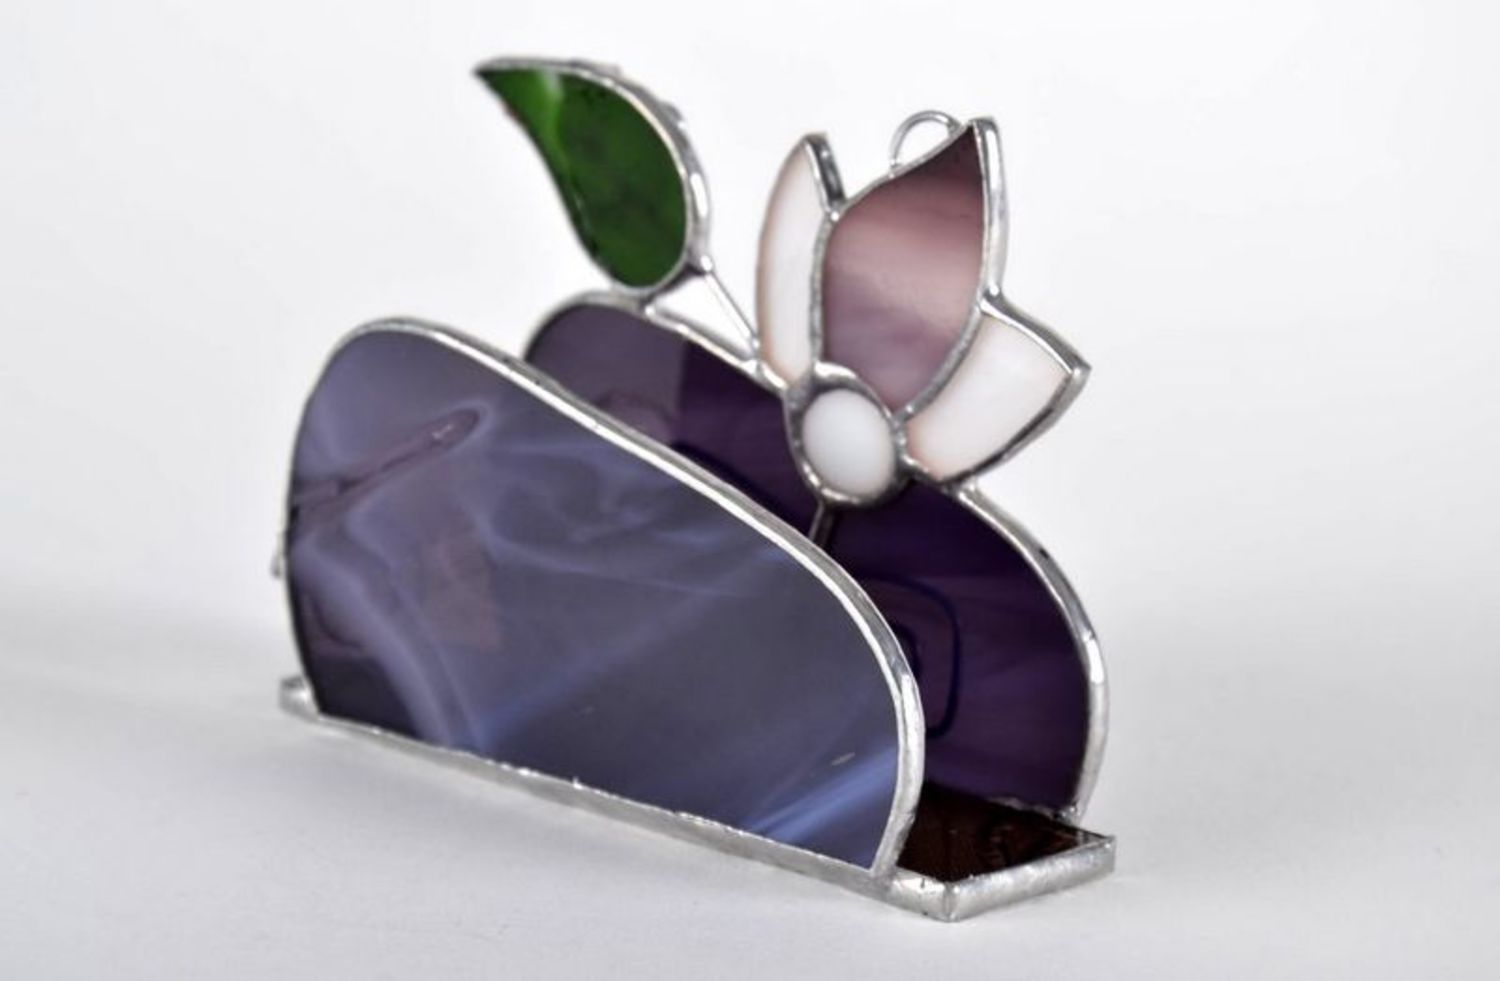 Stained glass business cards holder photo 4